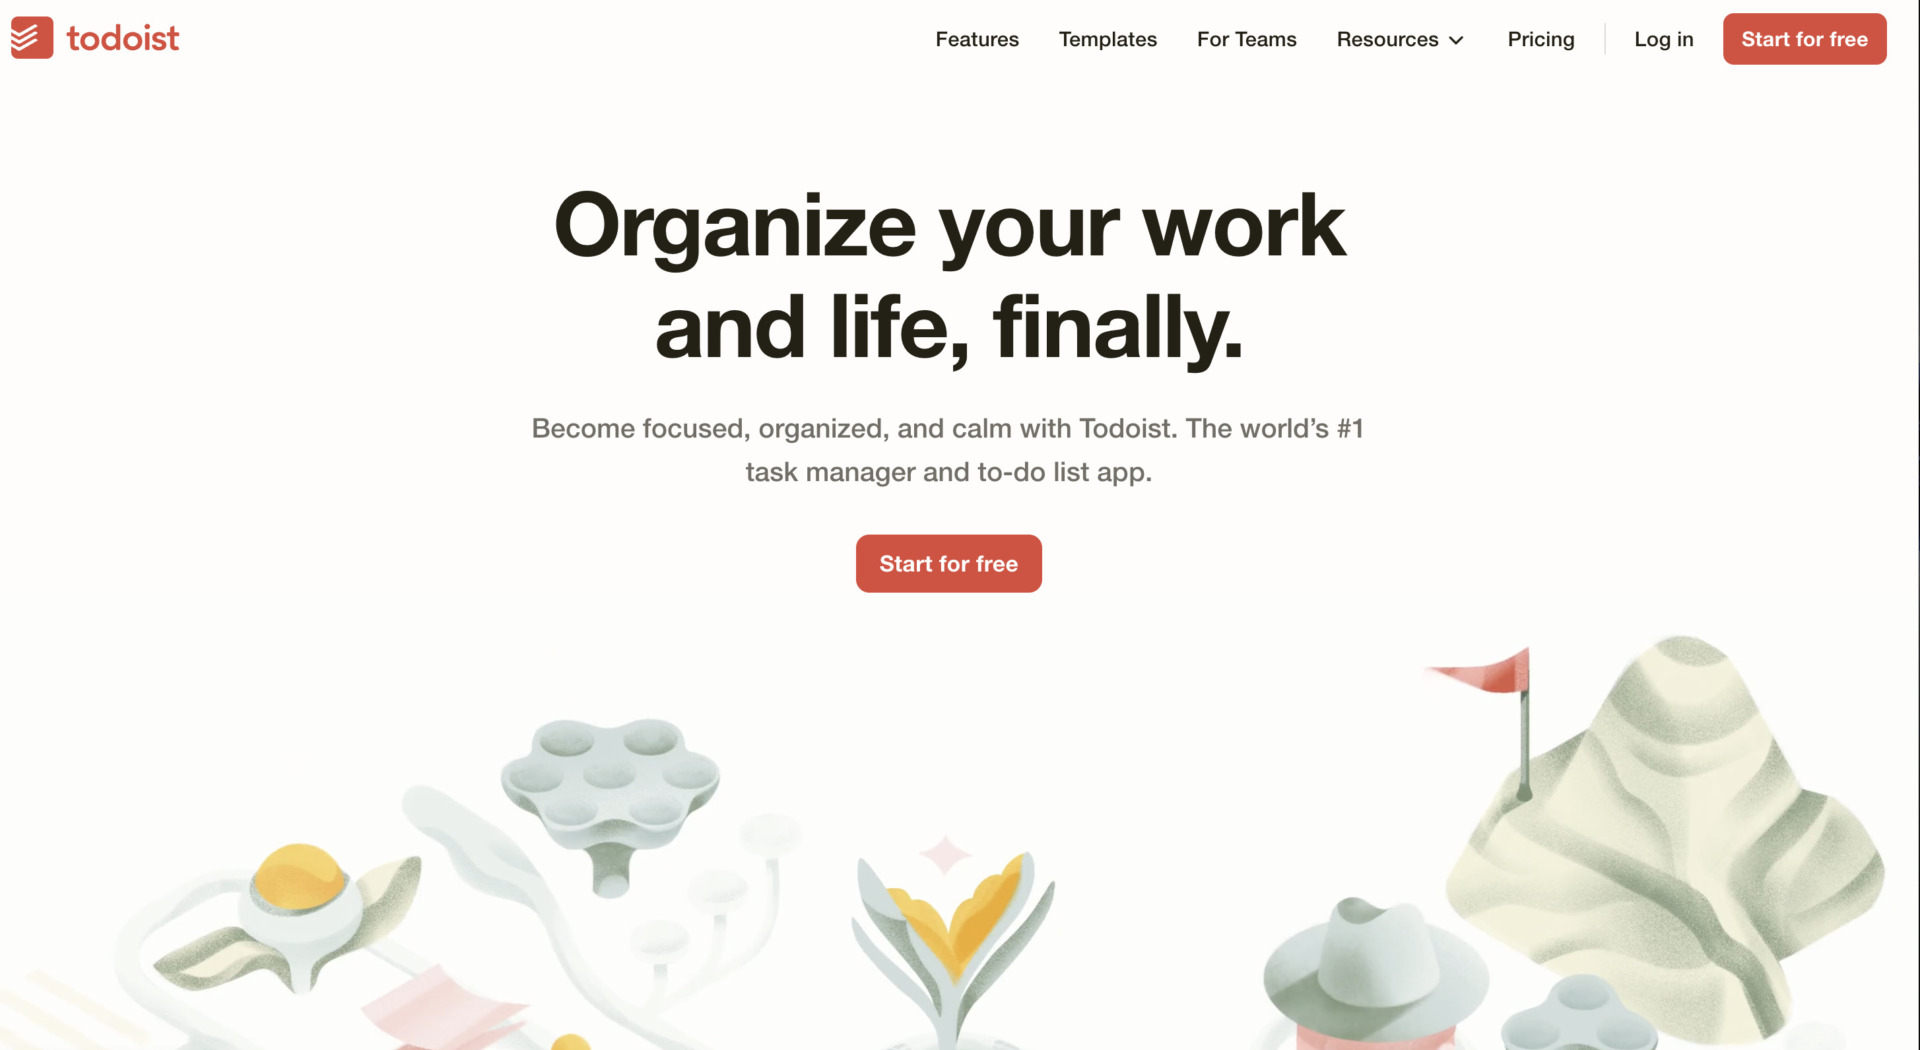 Top page of Todoist